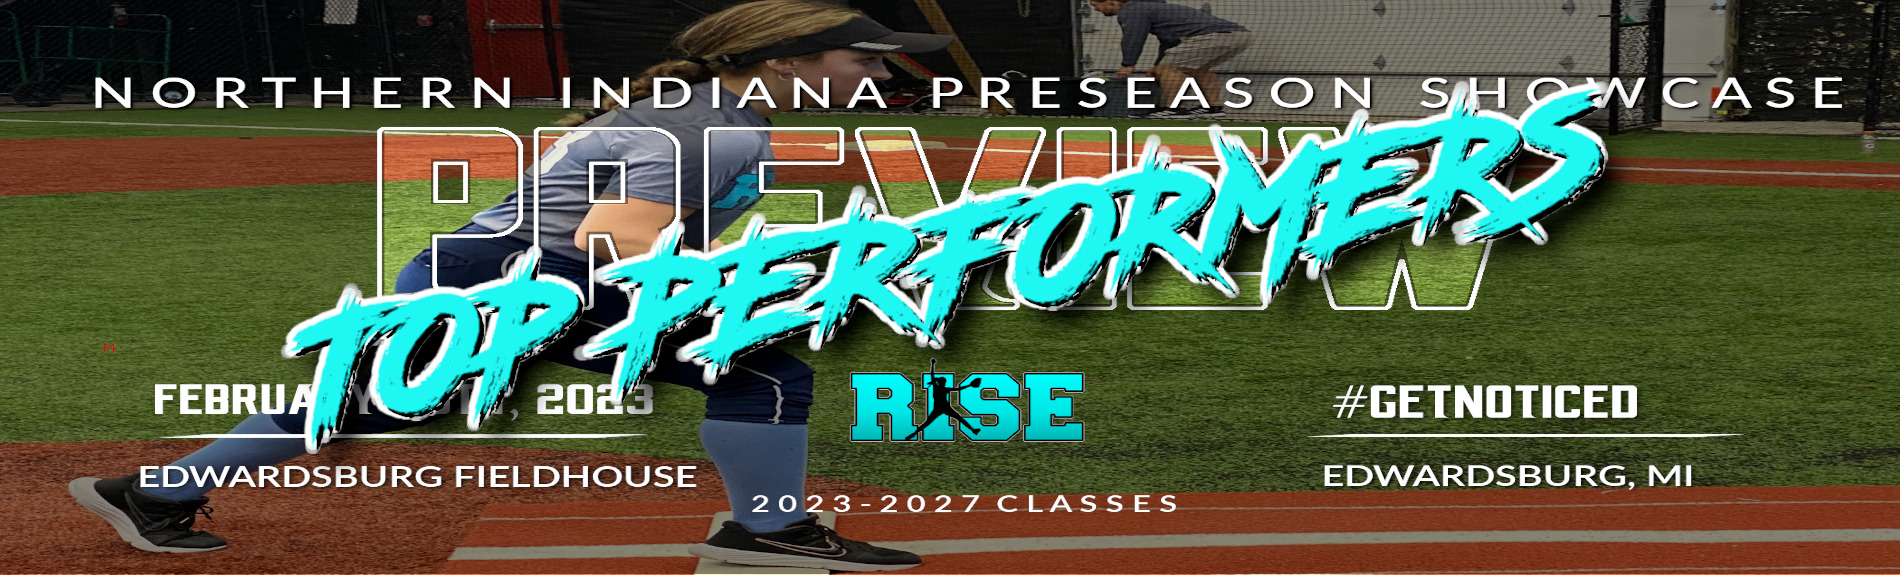 Northern Indiana Preseason Preview “TOP PERFORMERS”